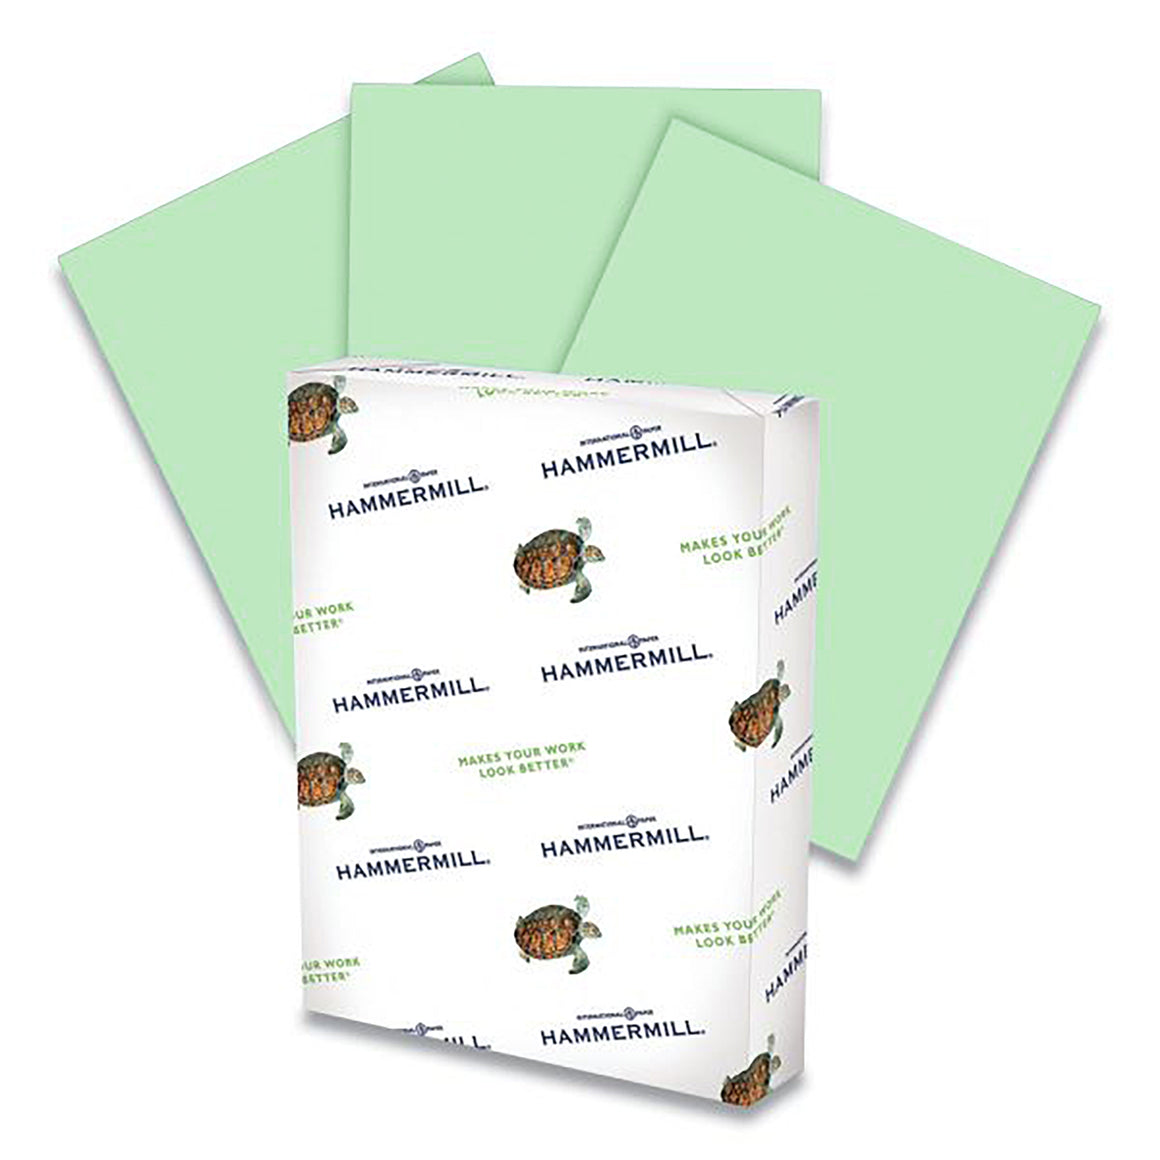 HAMMERMILL 8.5" X 11" Green Colored Paper (500 Sheets/Ream)